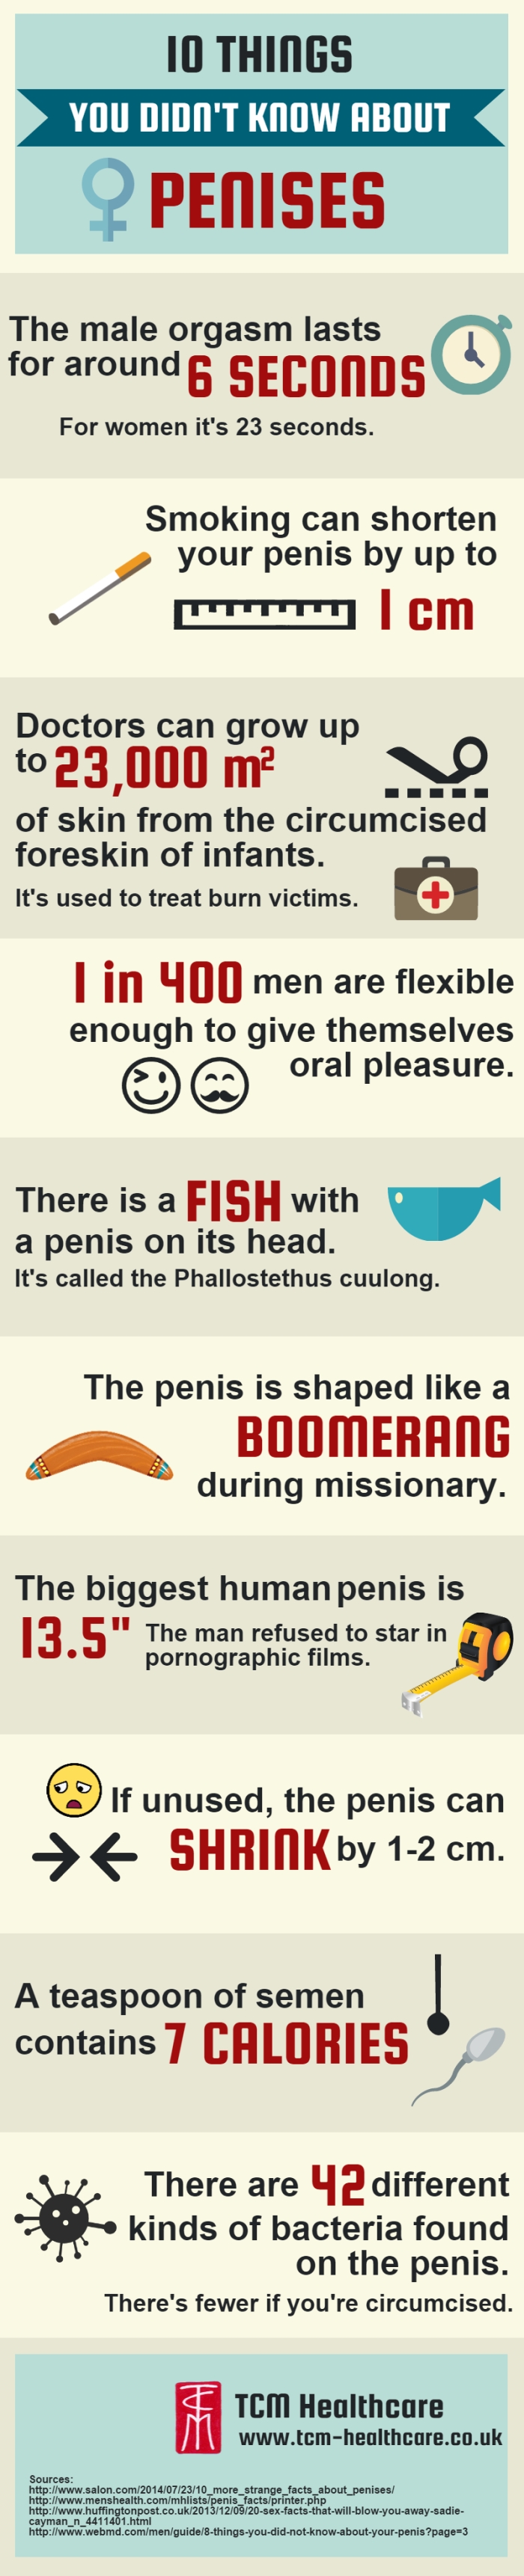 10 Important Things You Probably Didn't Know About Penises (infographic)